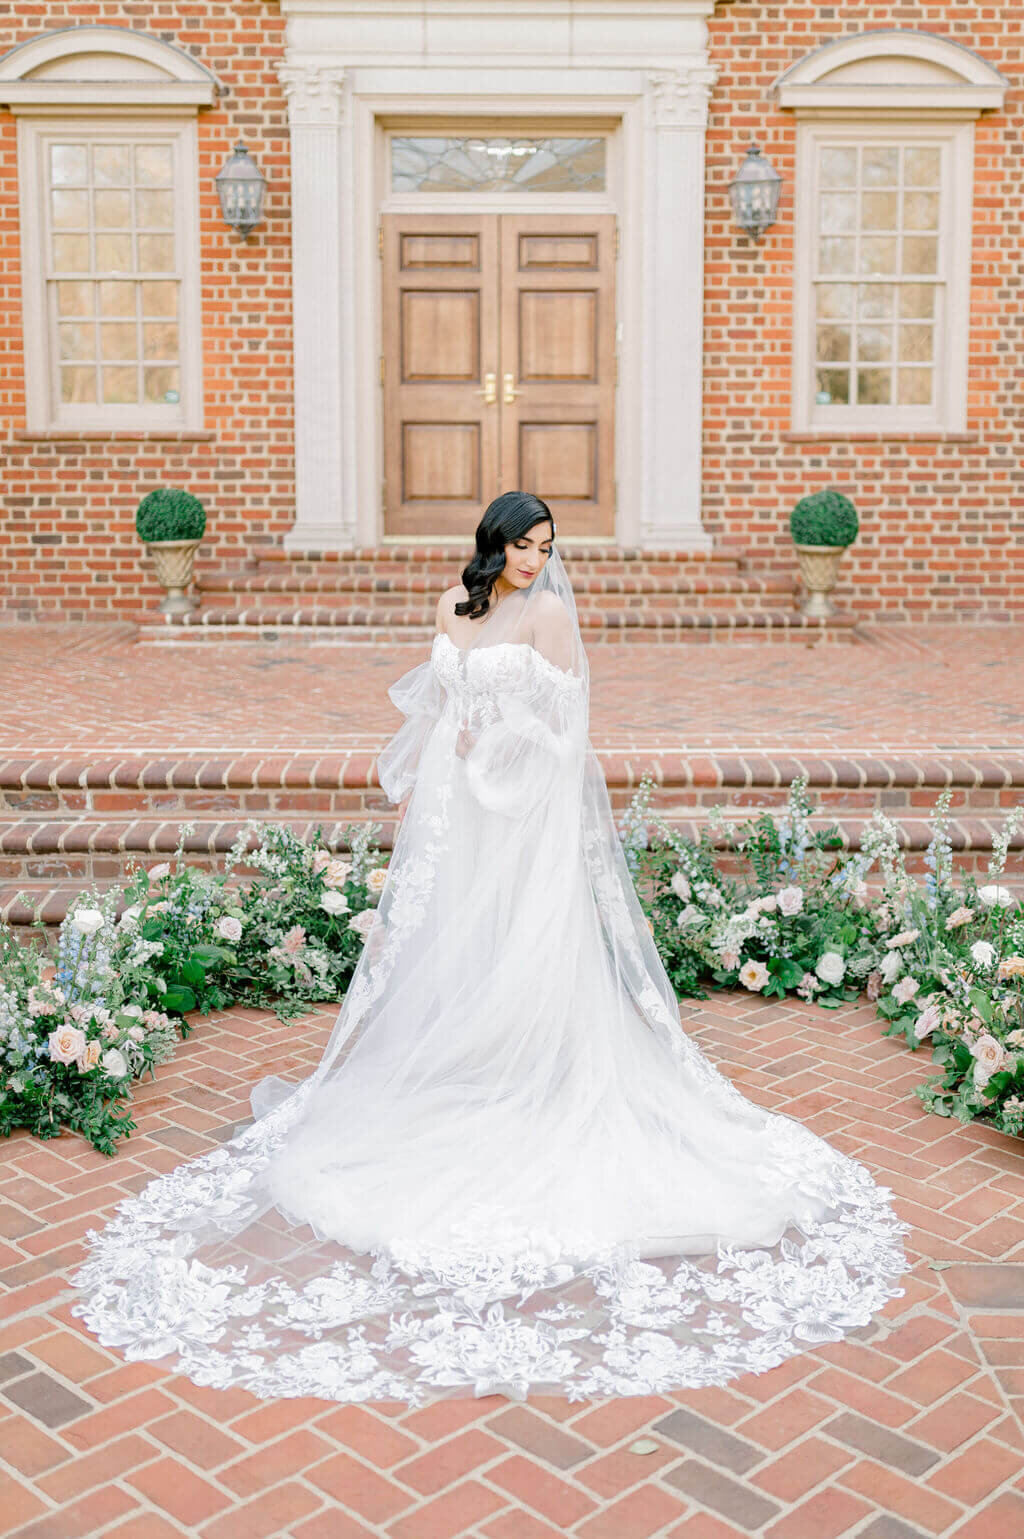 Bridal portrait surrounded by flowers